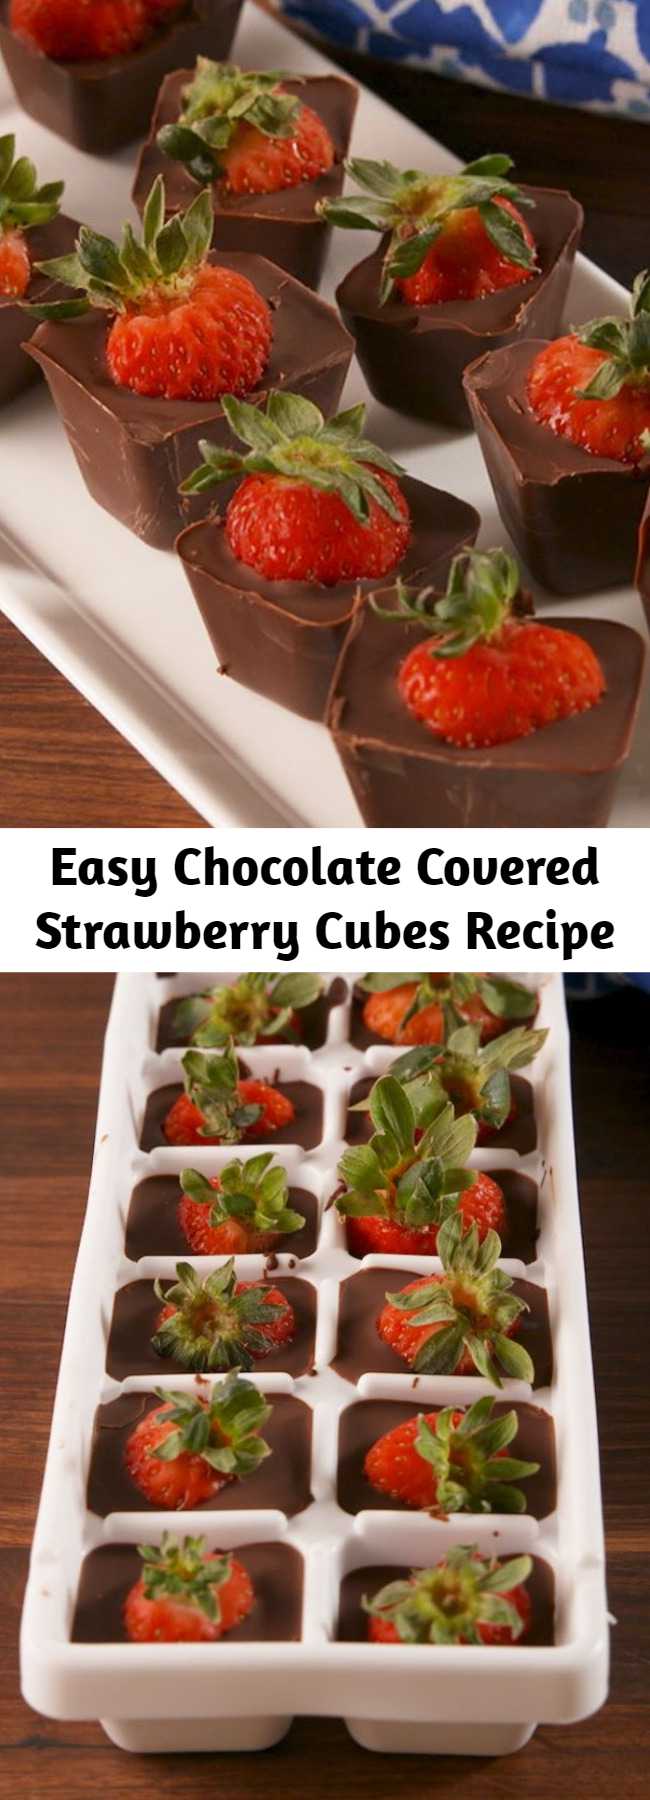 Easy Chocolate Covered Strawberry Cubes Recipe - This ice cube tray hack is the easiest way to make chocolate covered strawberries. The perfect chocolate to strawberry ratio. #recipe #easyrecipe #chocolate #strawberry #strawberries #valentinesday #valentine #hack #lifehack #dessert #sweet #coconutoil